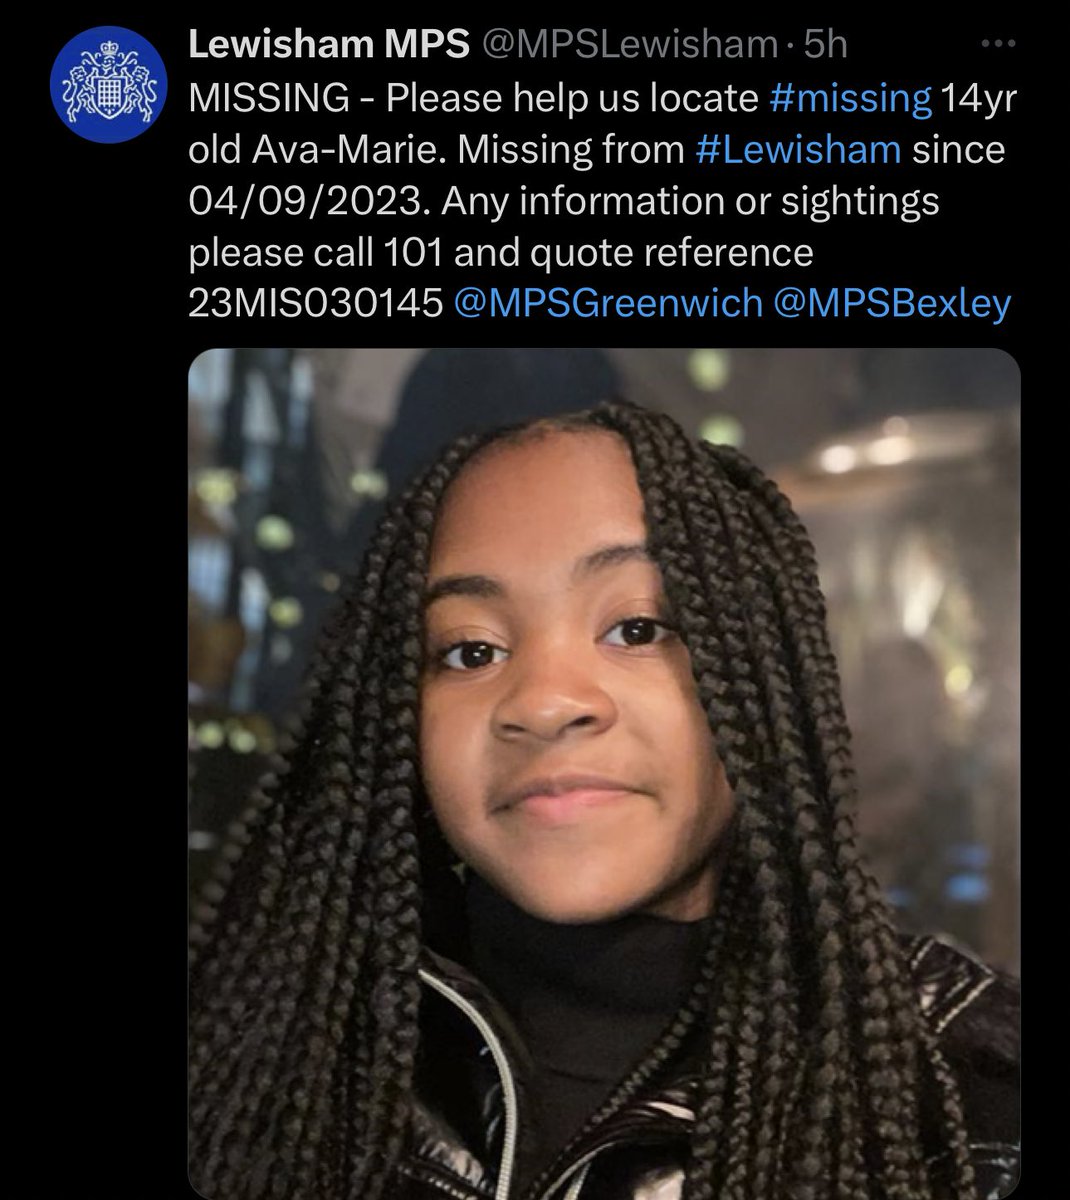 Please please share Widely! MISSING - Please help us locate #missing 14yr old Ava-Marie. Missing from #Lewisham since 04/09/2023. Any information or sightings please call 101 and quote reference 23MIS030145 @MPSGreenwich @MPSBexley